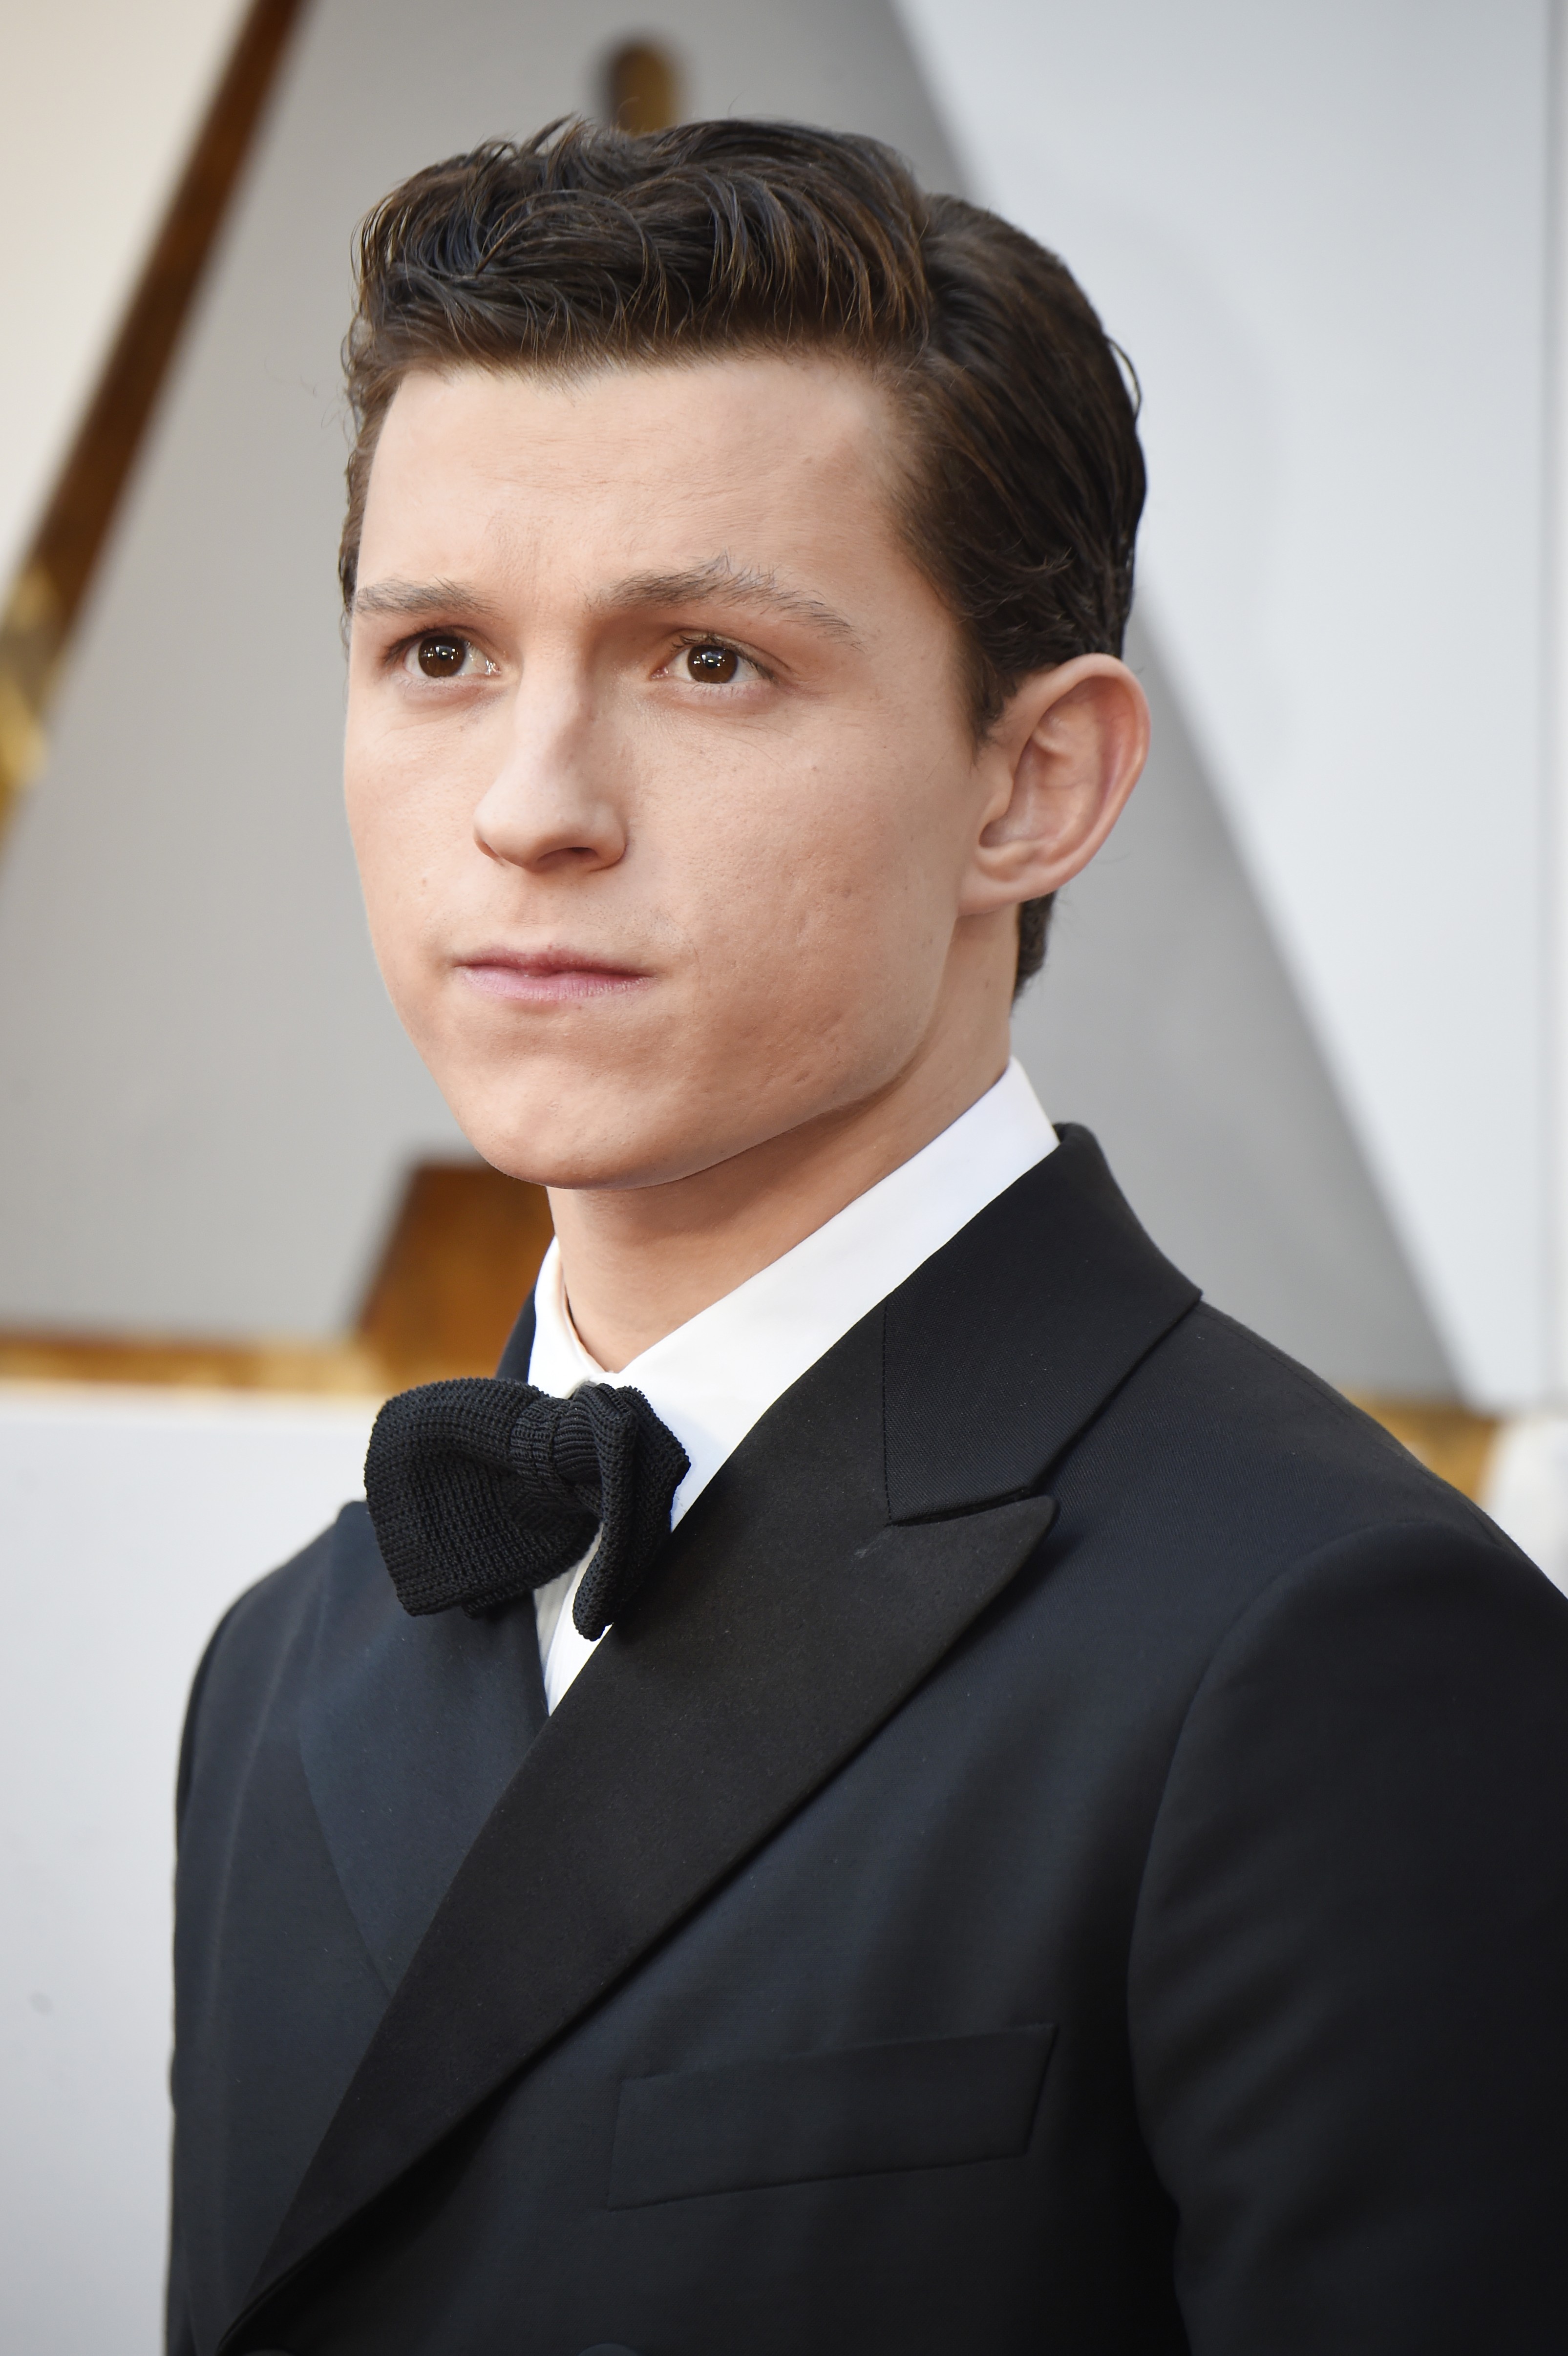 HOLLYWOOD, CA - MARCH 04:  Tom Holland attends the 90th Annual Academy Awards at Hollywood & Highland Center on March 4, 2018 in Hollywood, California.  (Photo by Kevin Mazur/WireImage) (Foto: WireImage)